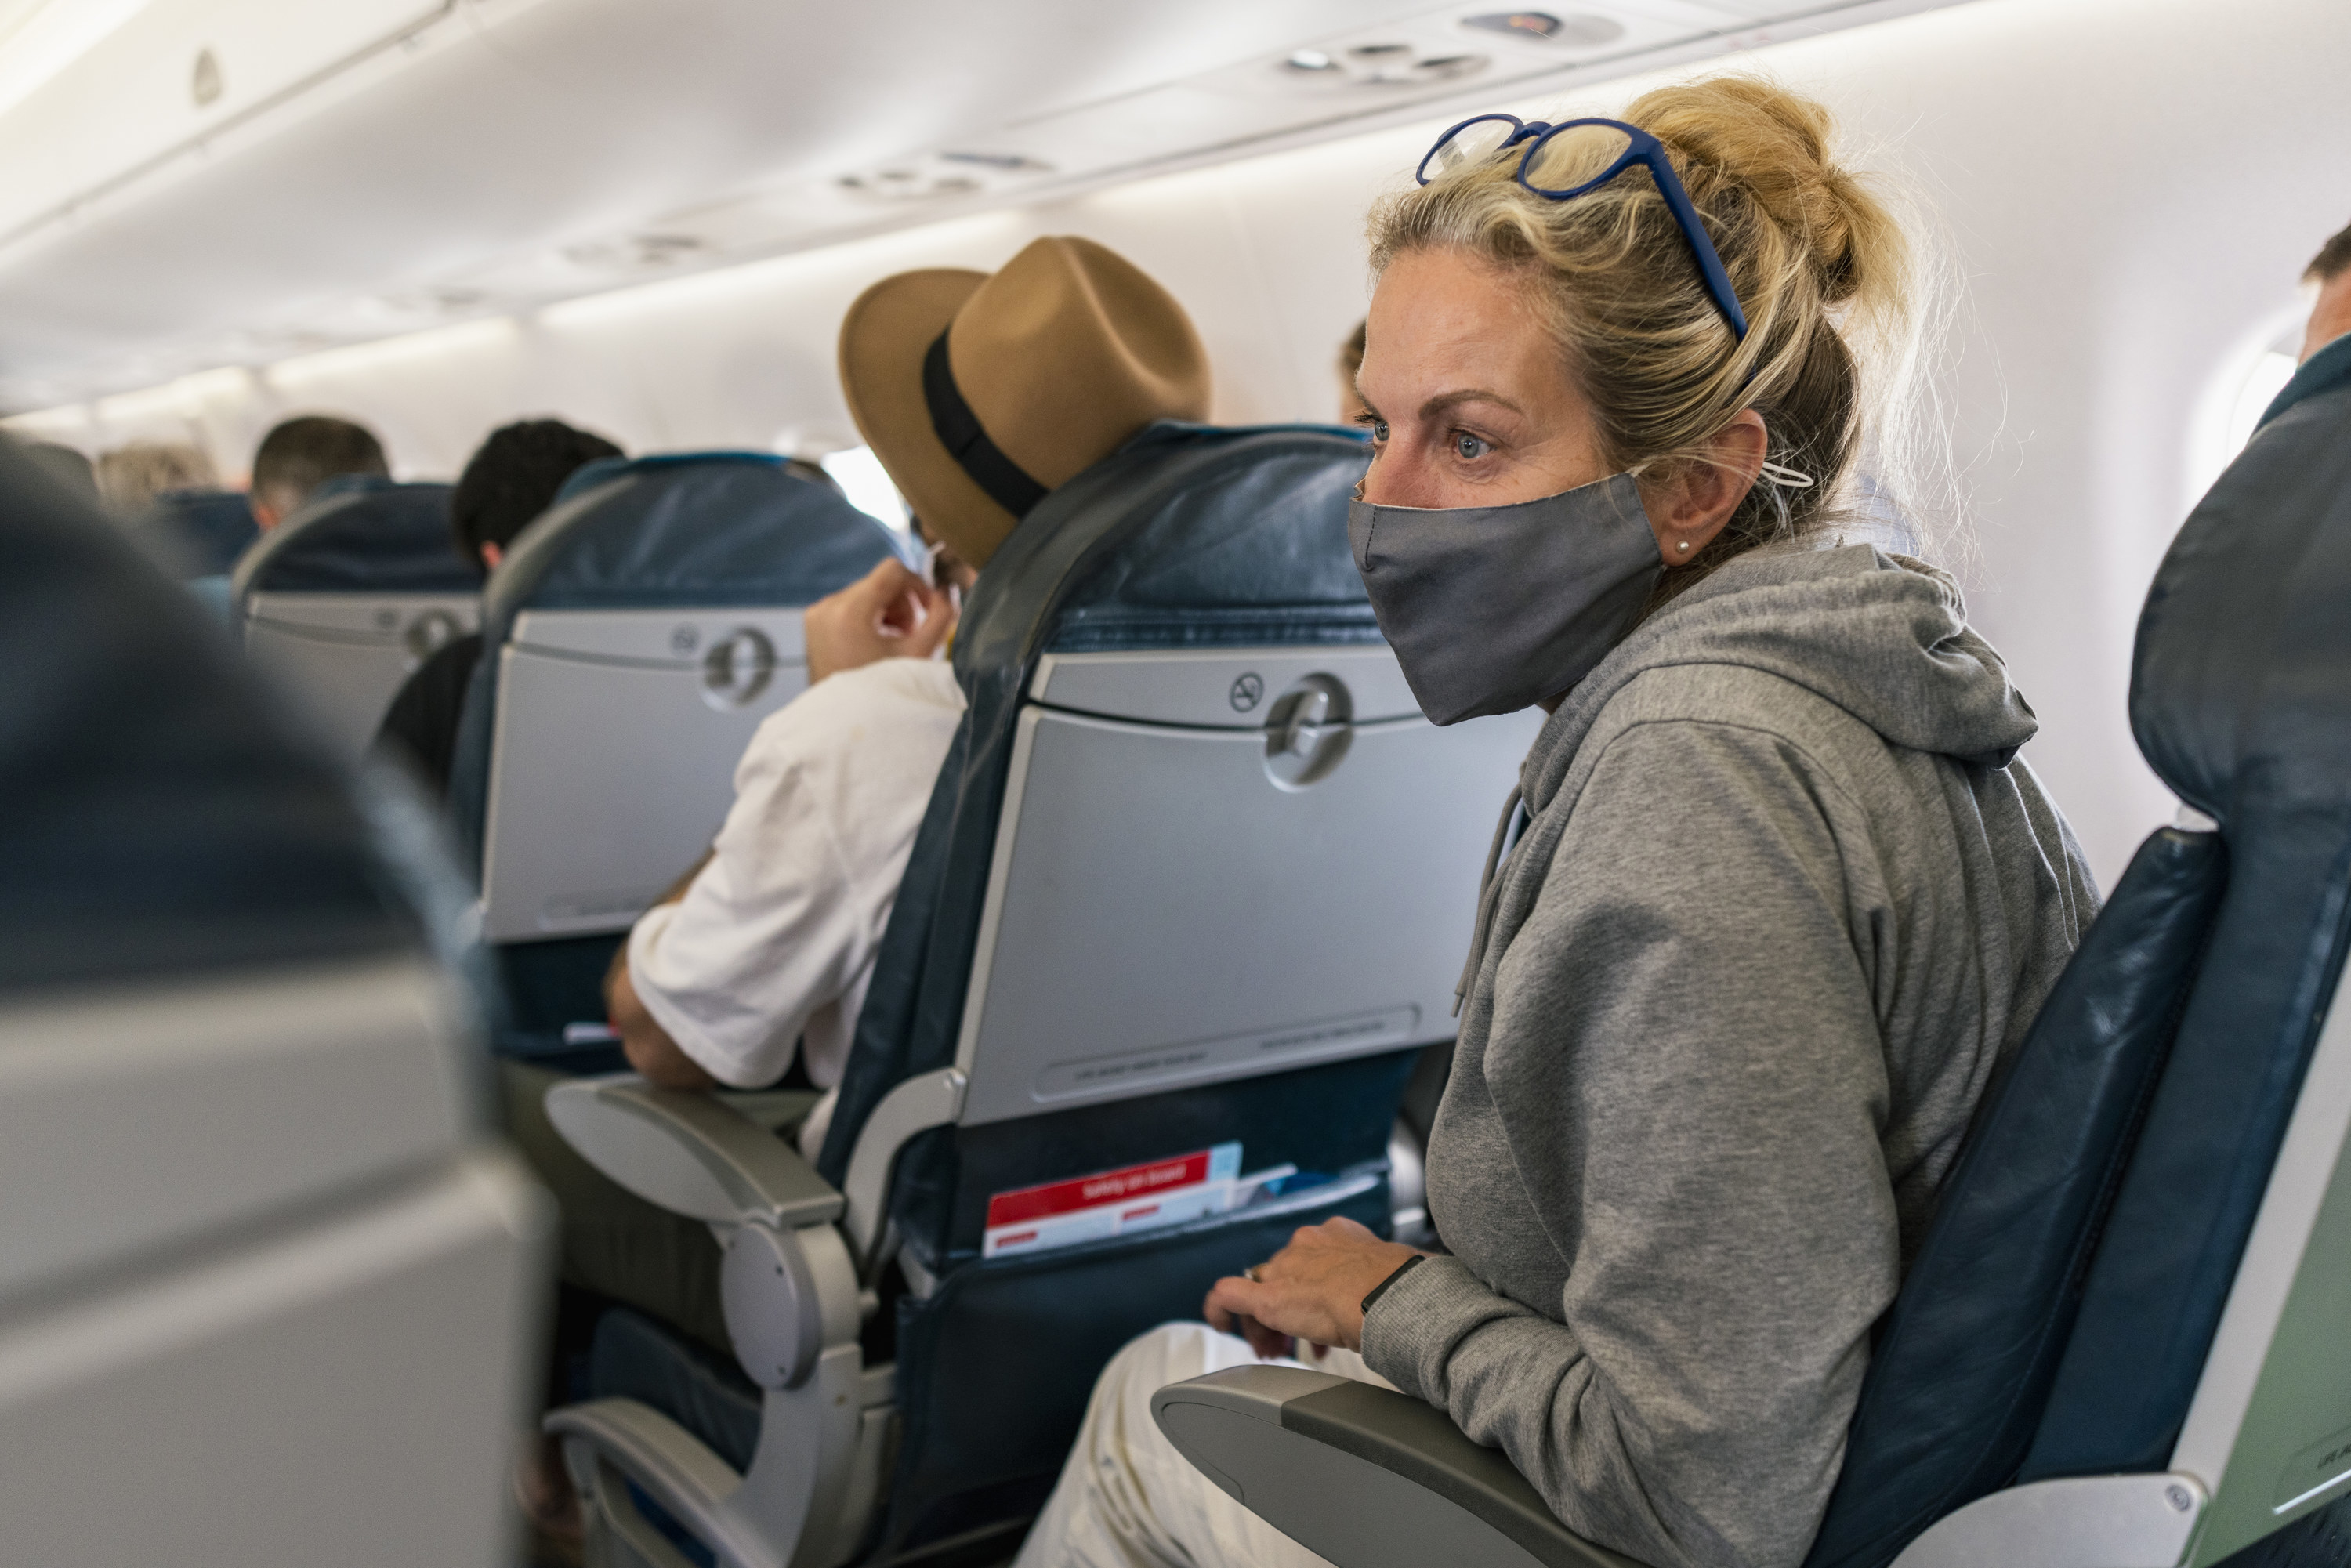 Woman sitting on a plane wearing a protective face mask